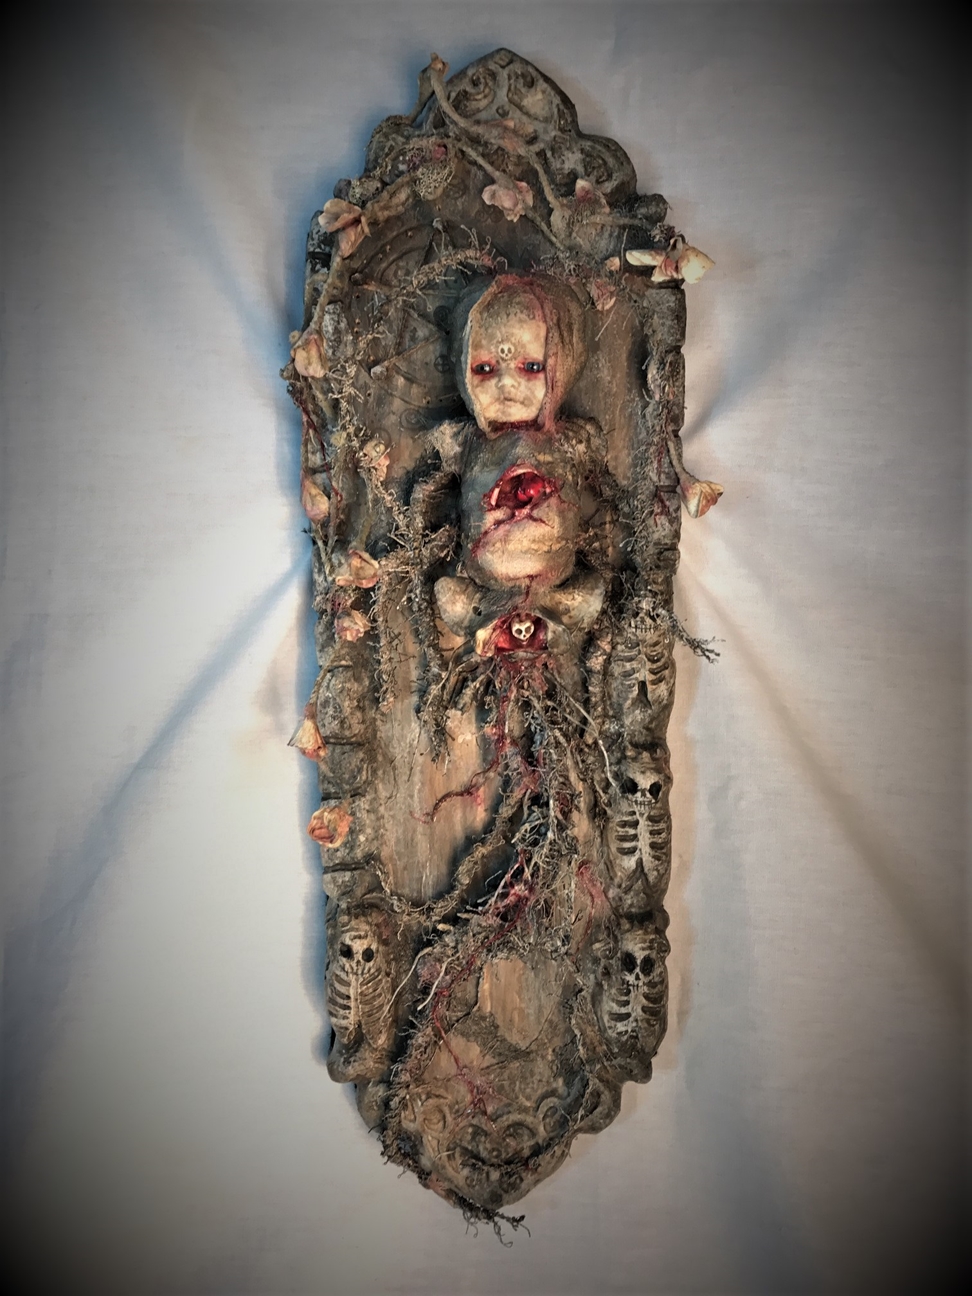 mixed media assemblage ghostly repainted baby doll mounted on wooden board dark art doll split bleeding chest